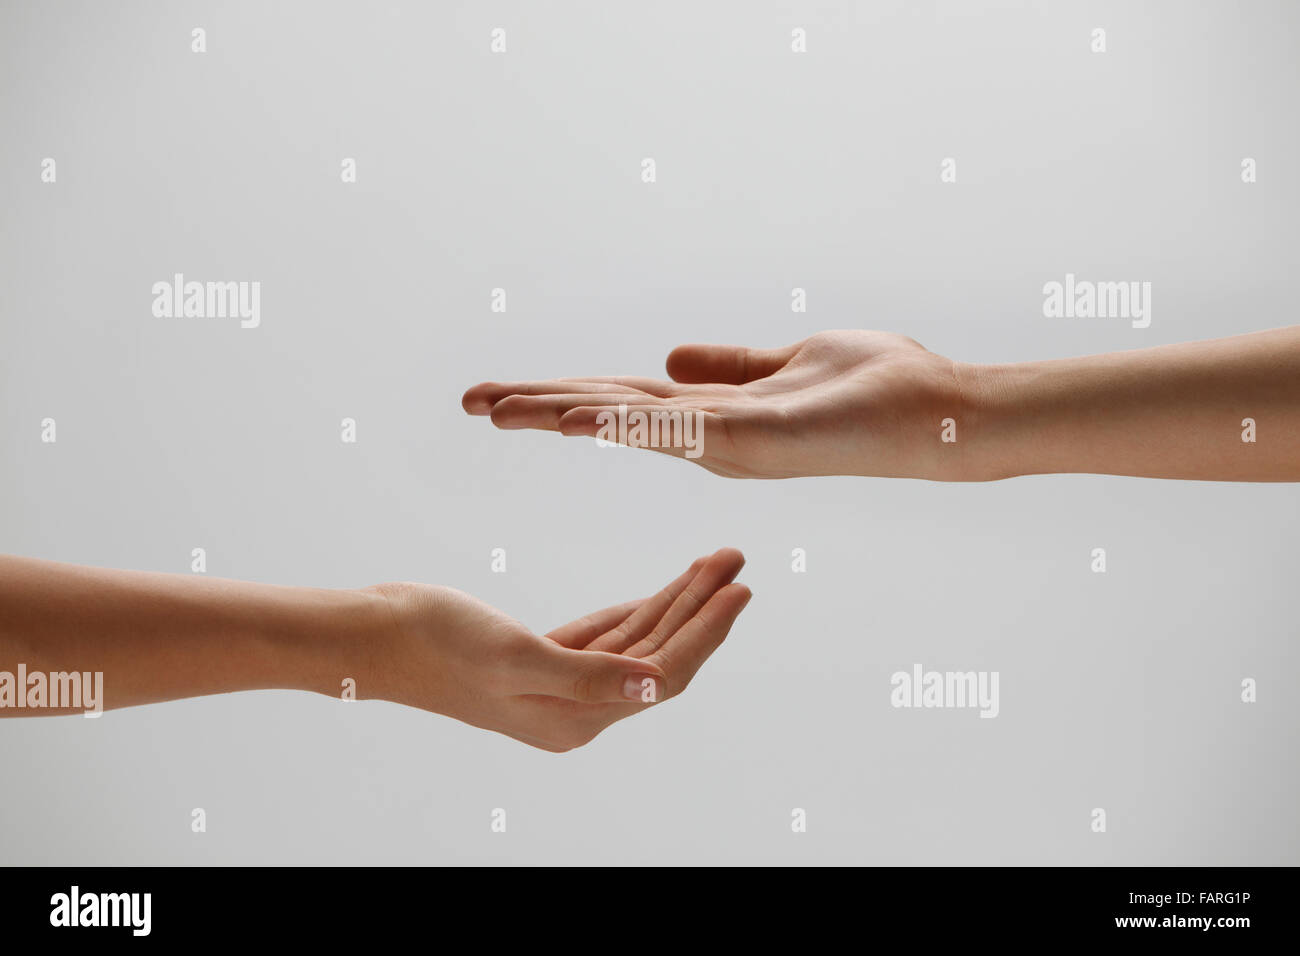 Open palm hand gesture of male hand isolated against grey background. Stock Photo